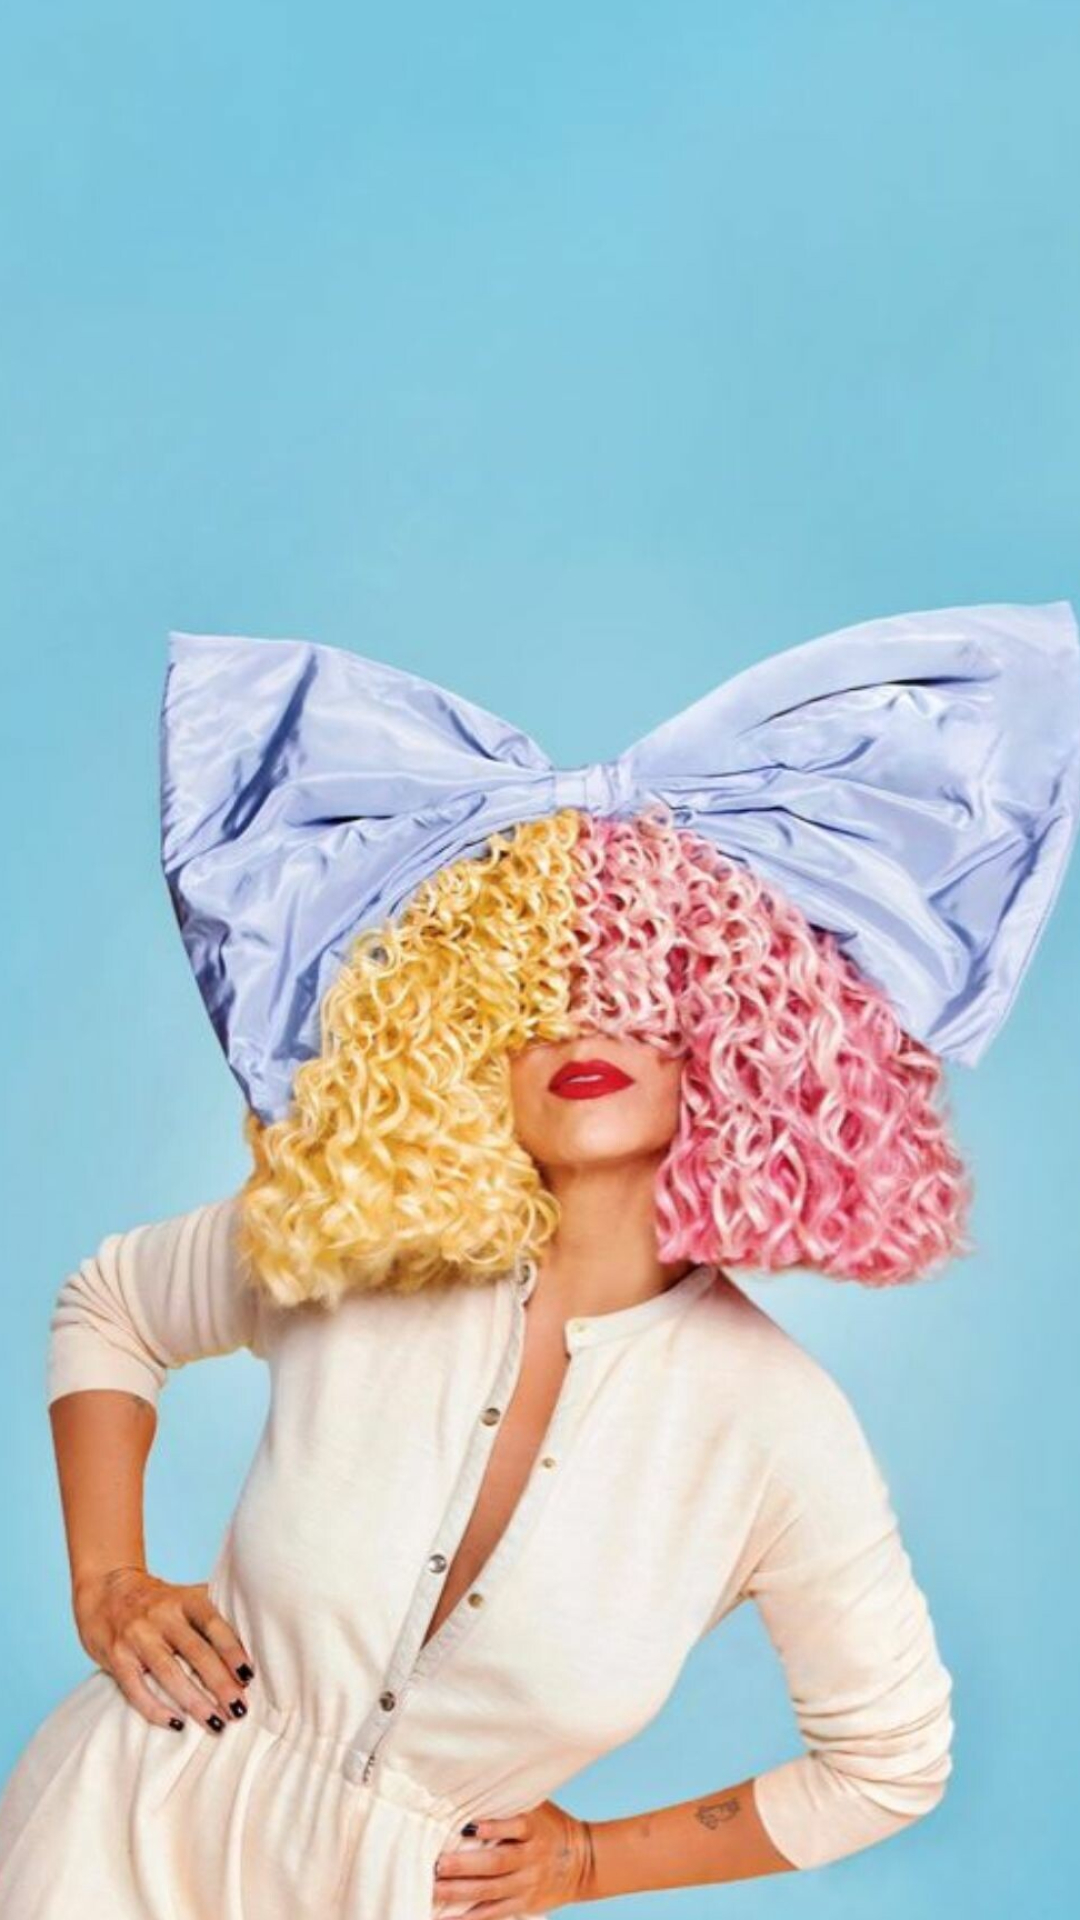 Sia: Colour the Small One peaked at No. 14 on the Billboard Top Heatseekers Albums Chart. 1080x1920 Full HD Wallpaper.